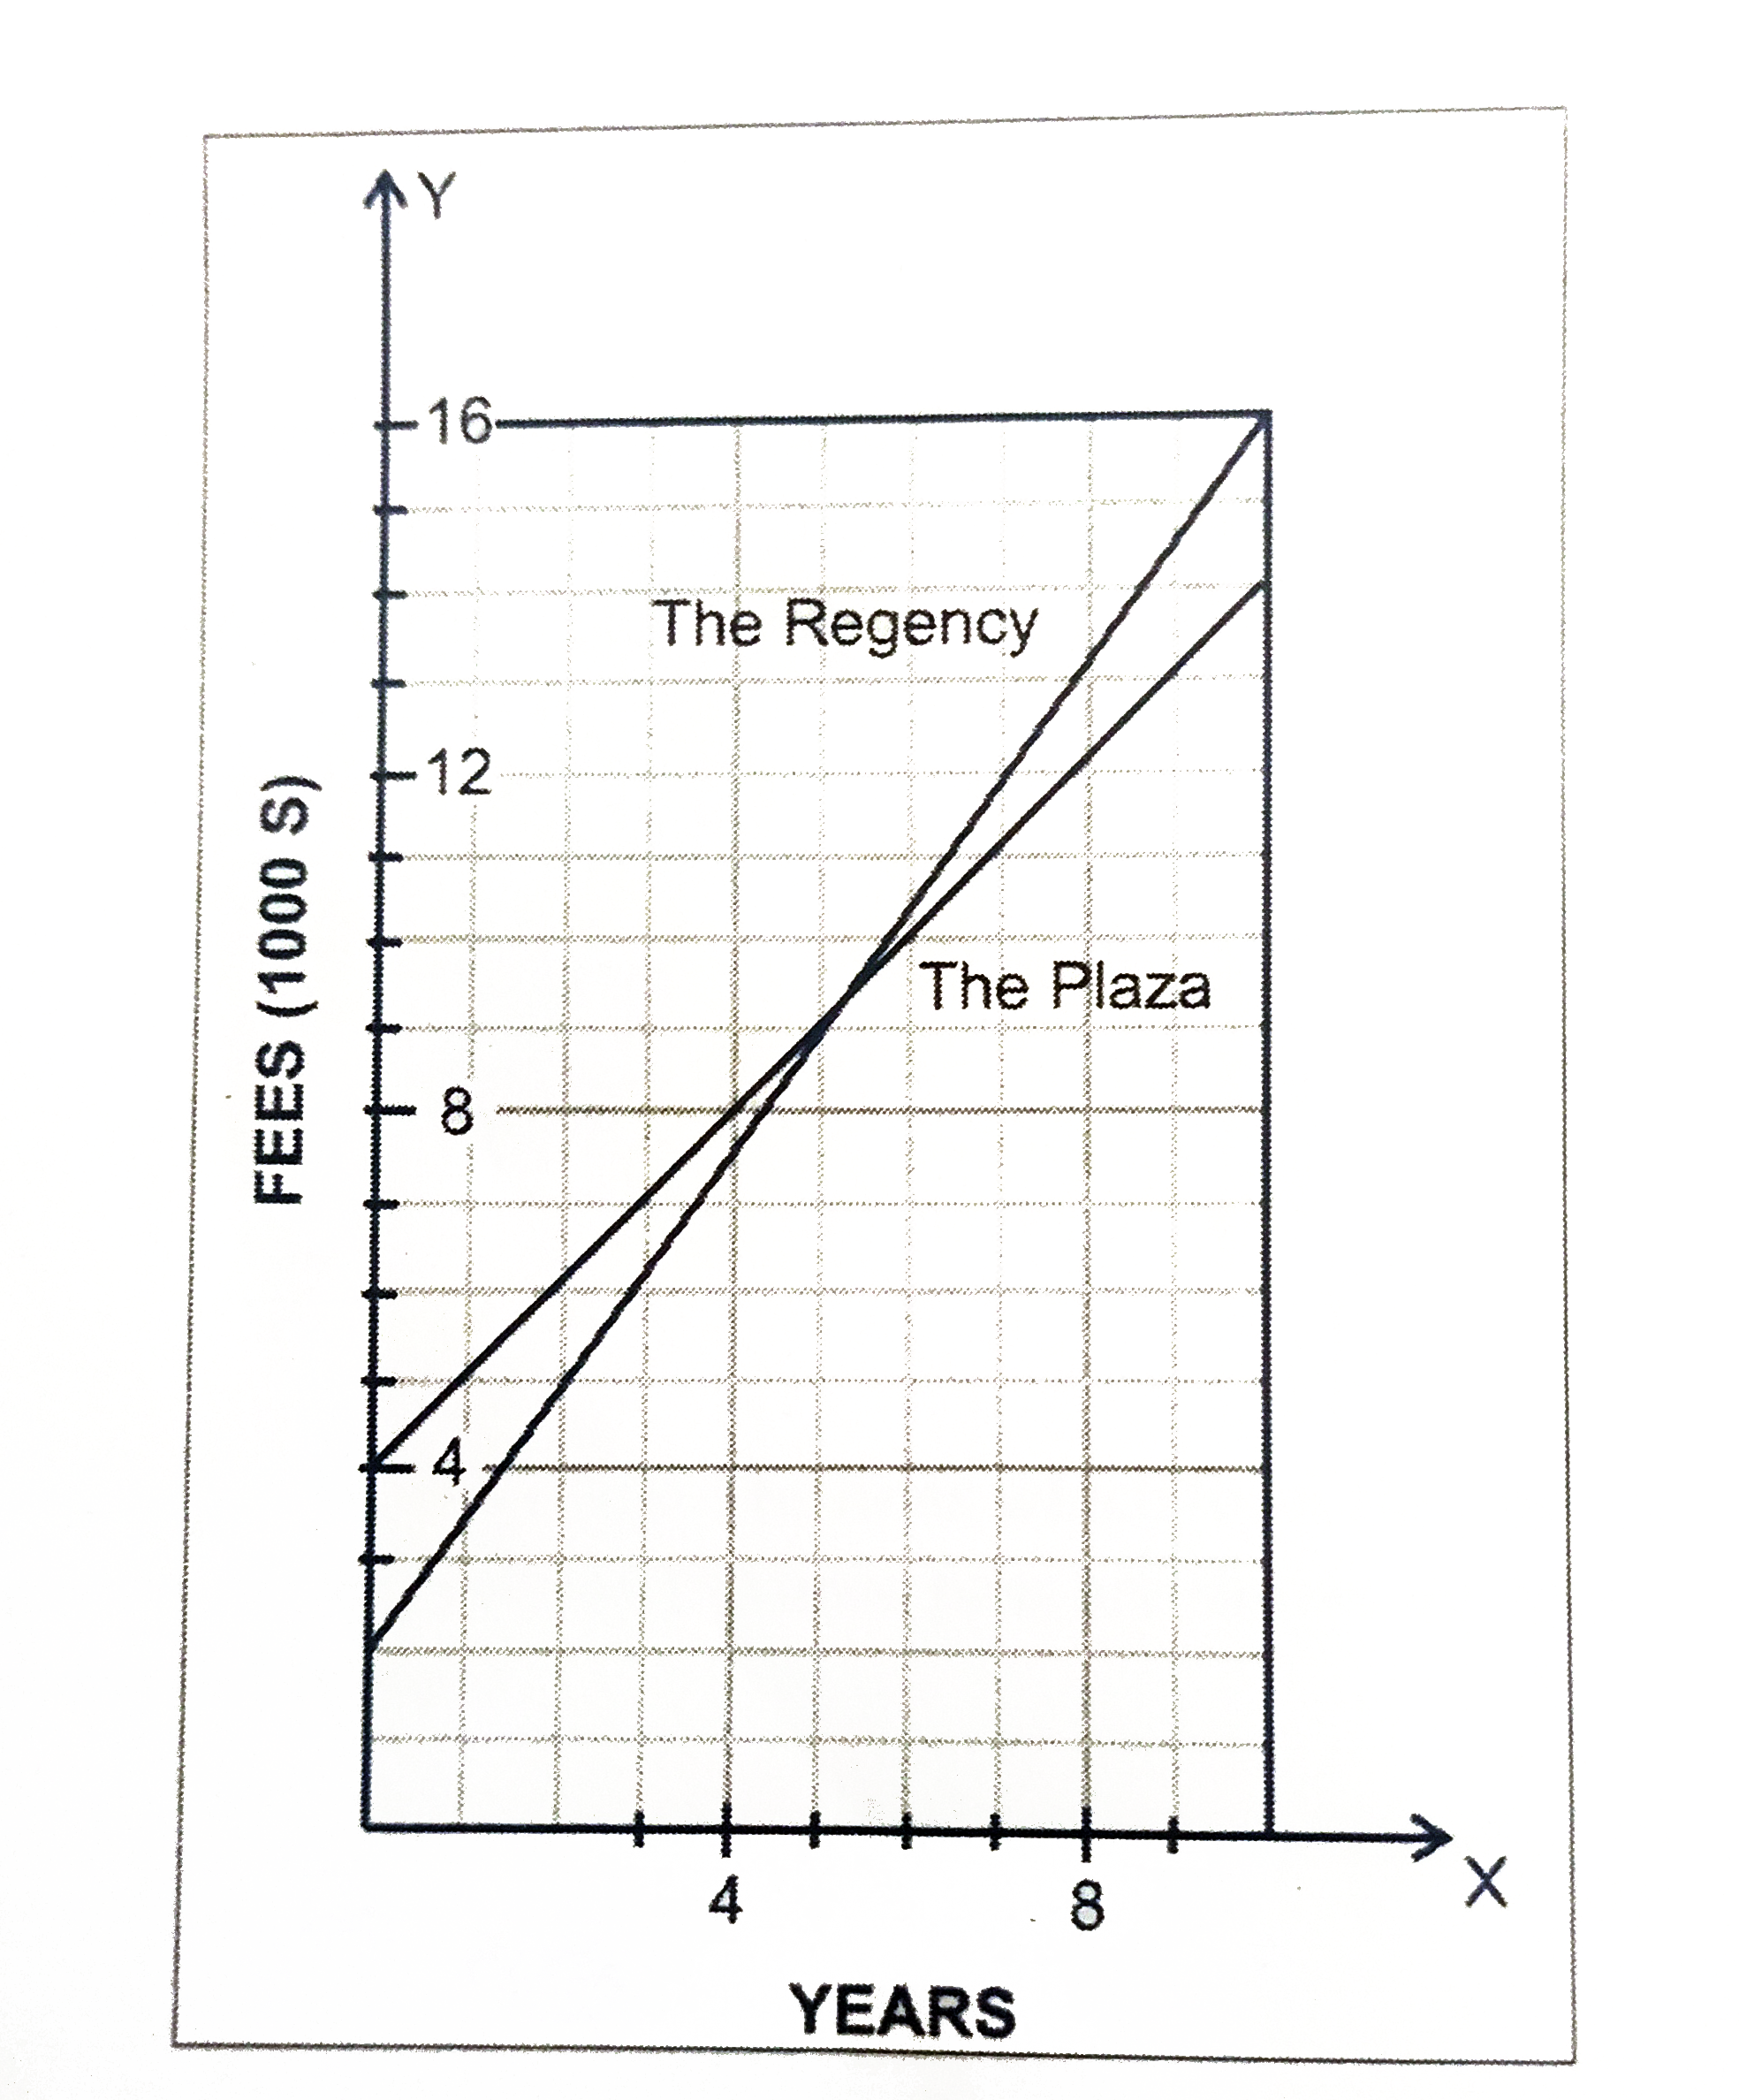 The membership plans of two health clubs,  The Plaza and The Regency  for ten  years  are shown in the graph  below ( membership  fees  are in  thousand dollars).For  the intial  registration , each  club  requires  an upfornt  payment  of registration  fees and  every  year  thereafter  one needs  to pay  a fixed  annual membership fee. What  is the  difference  between  the annual  charges  of the  two  clubs ( in dollars ) ?